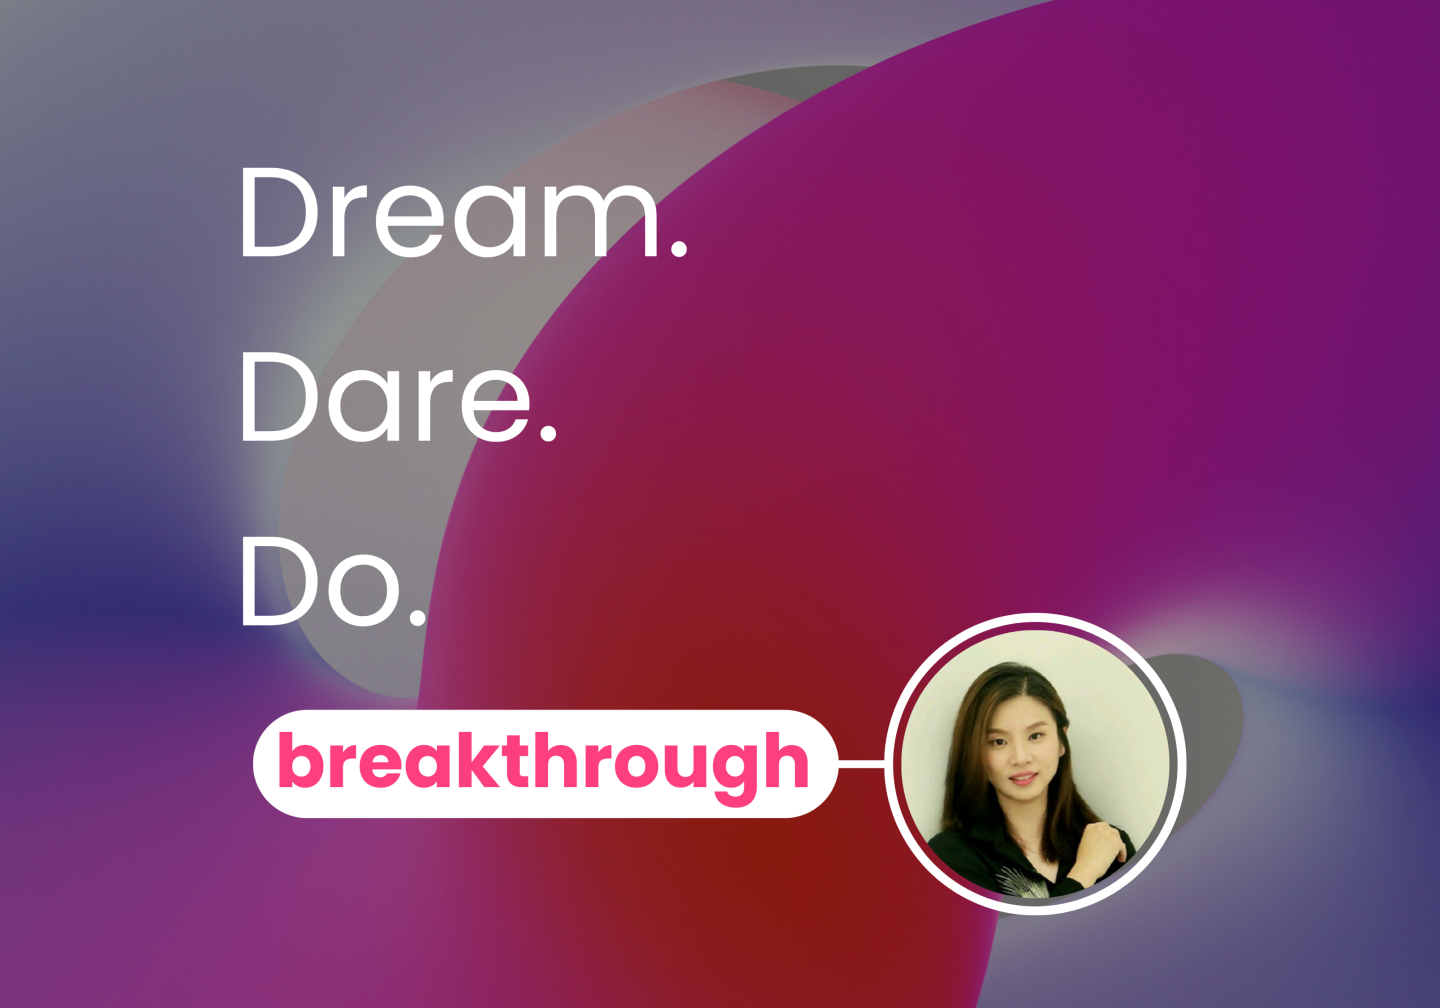 Breakthrough article image Dephin Lim - text on image Dream, Dare, Do.